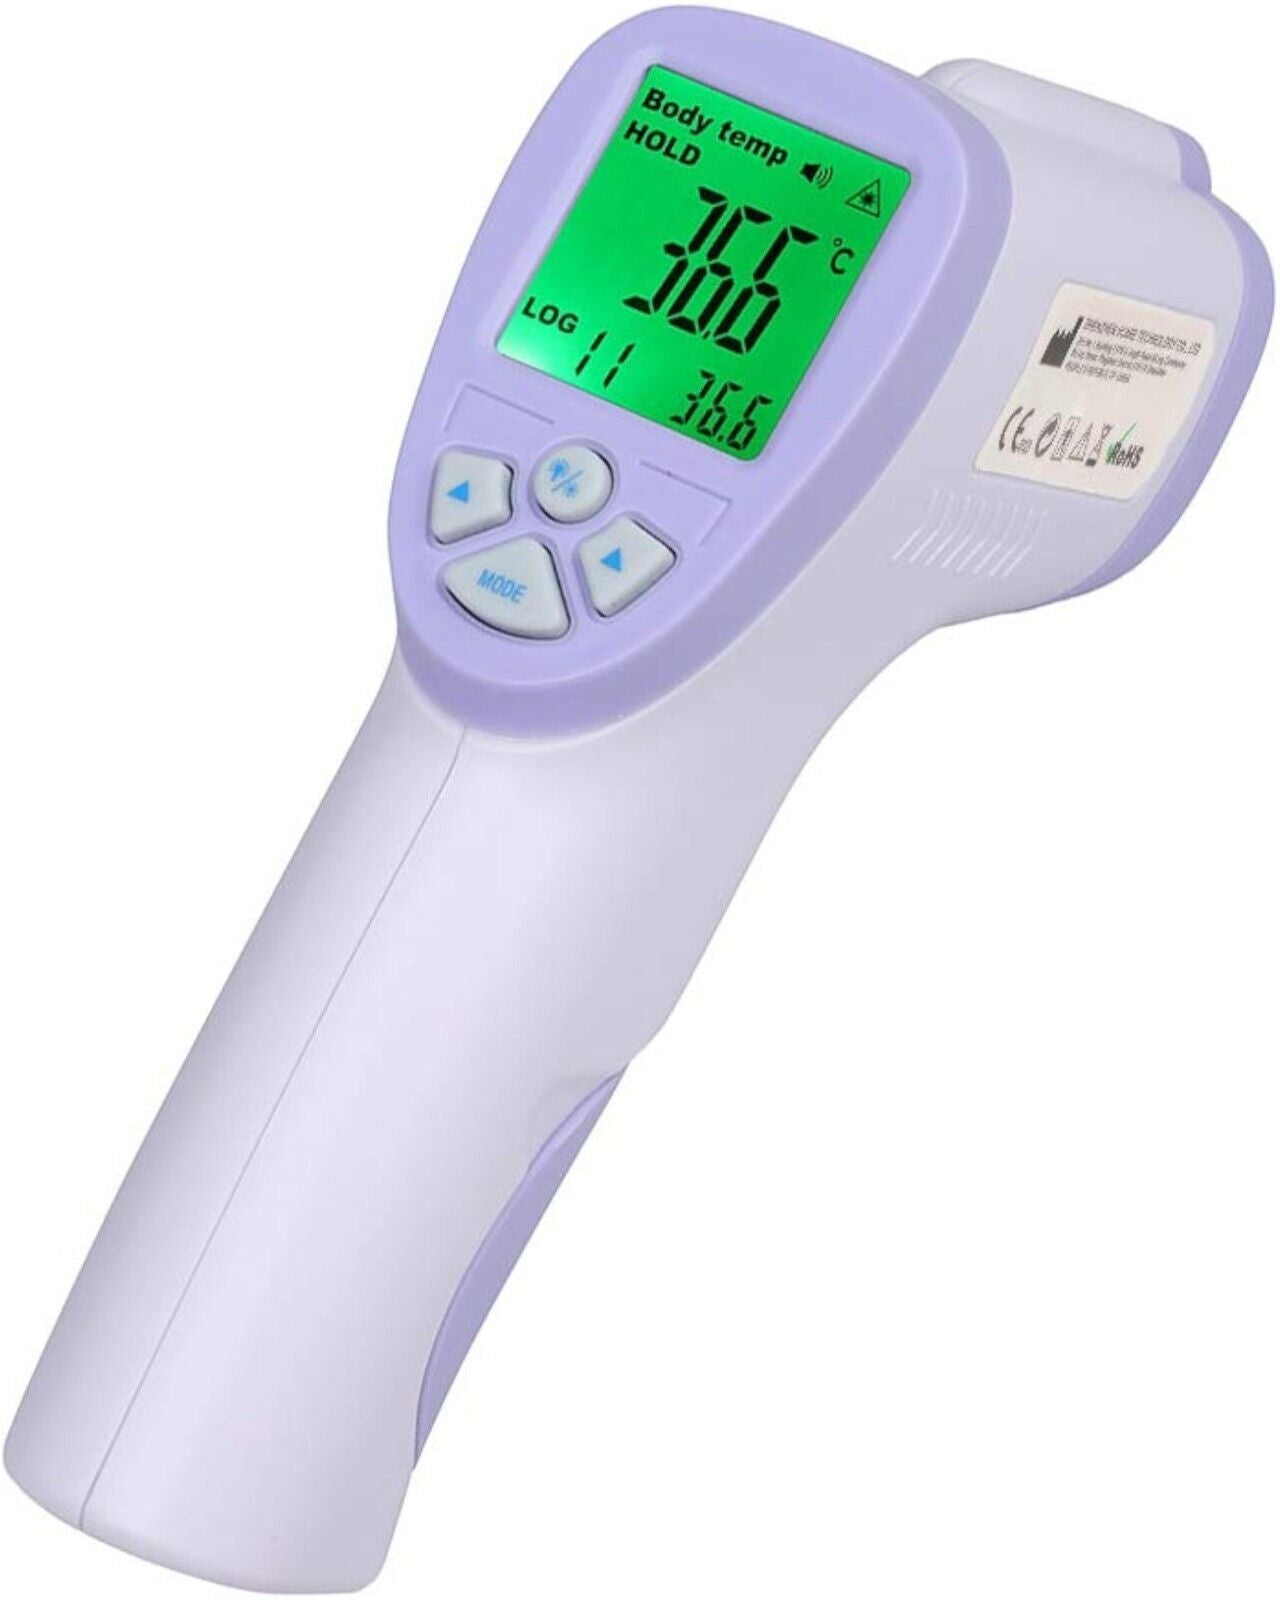 VCare VCARE-IRTH Contactless Infrared Forehead Thermometer, 132 g